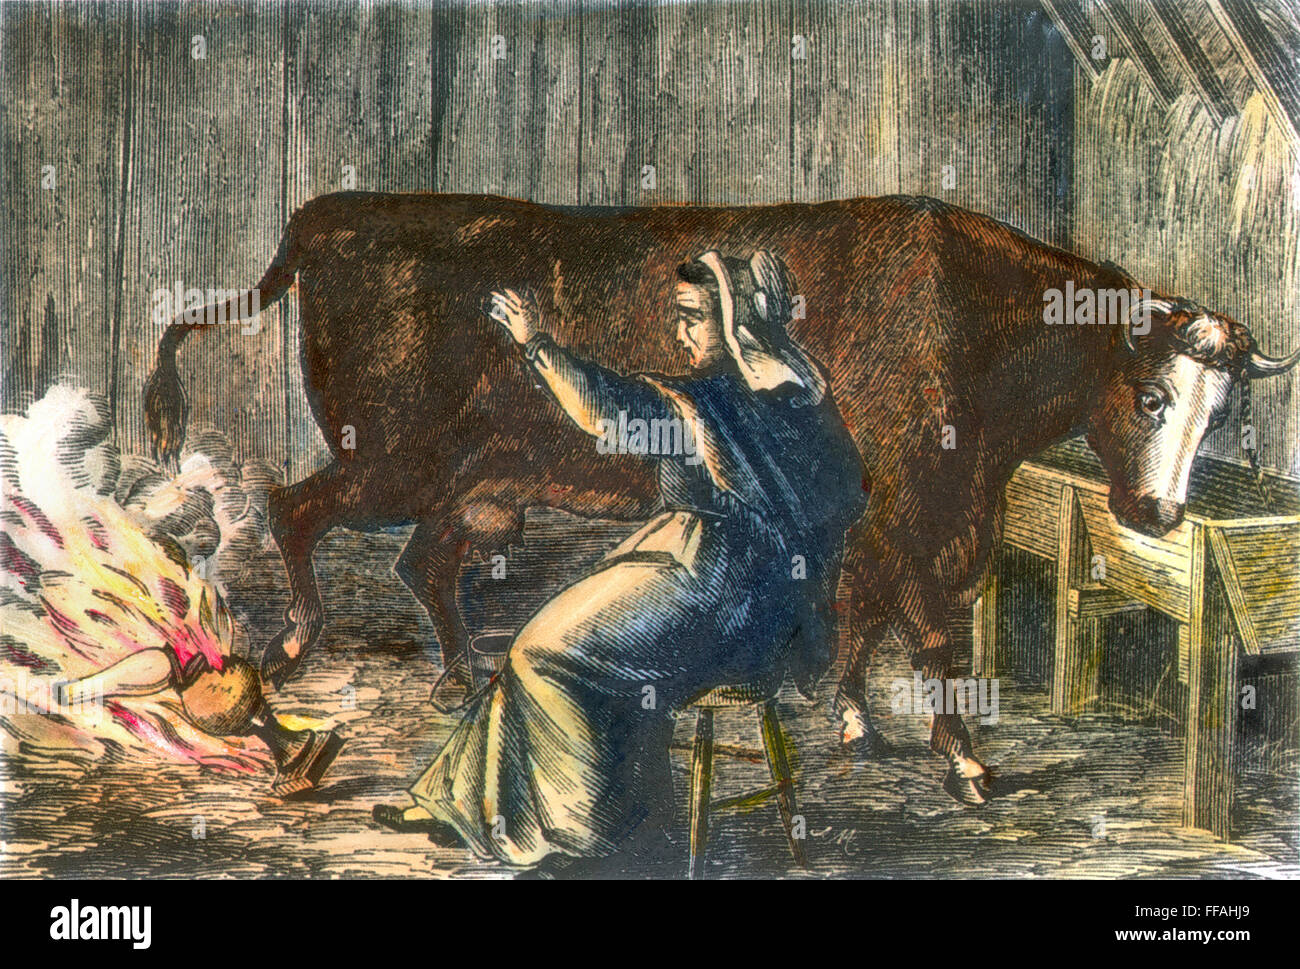 CHICAGO FIRE, 1871. /nMrs. Catherine O'Leary is horrified as her cow kicks over a lamp in her DeKoven Street barn on Chicago's West Side, 8 October 1871, the legendary cause of the subsequent Great Fire at Chicago. Wood engraving, late 19th century. Stock Photo